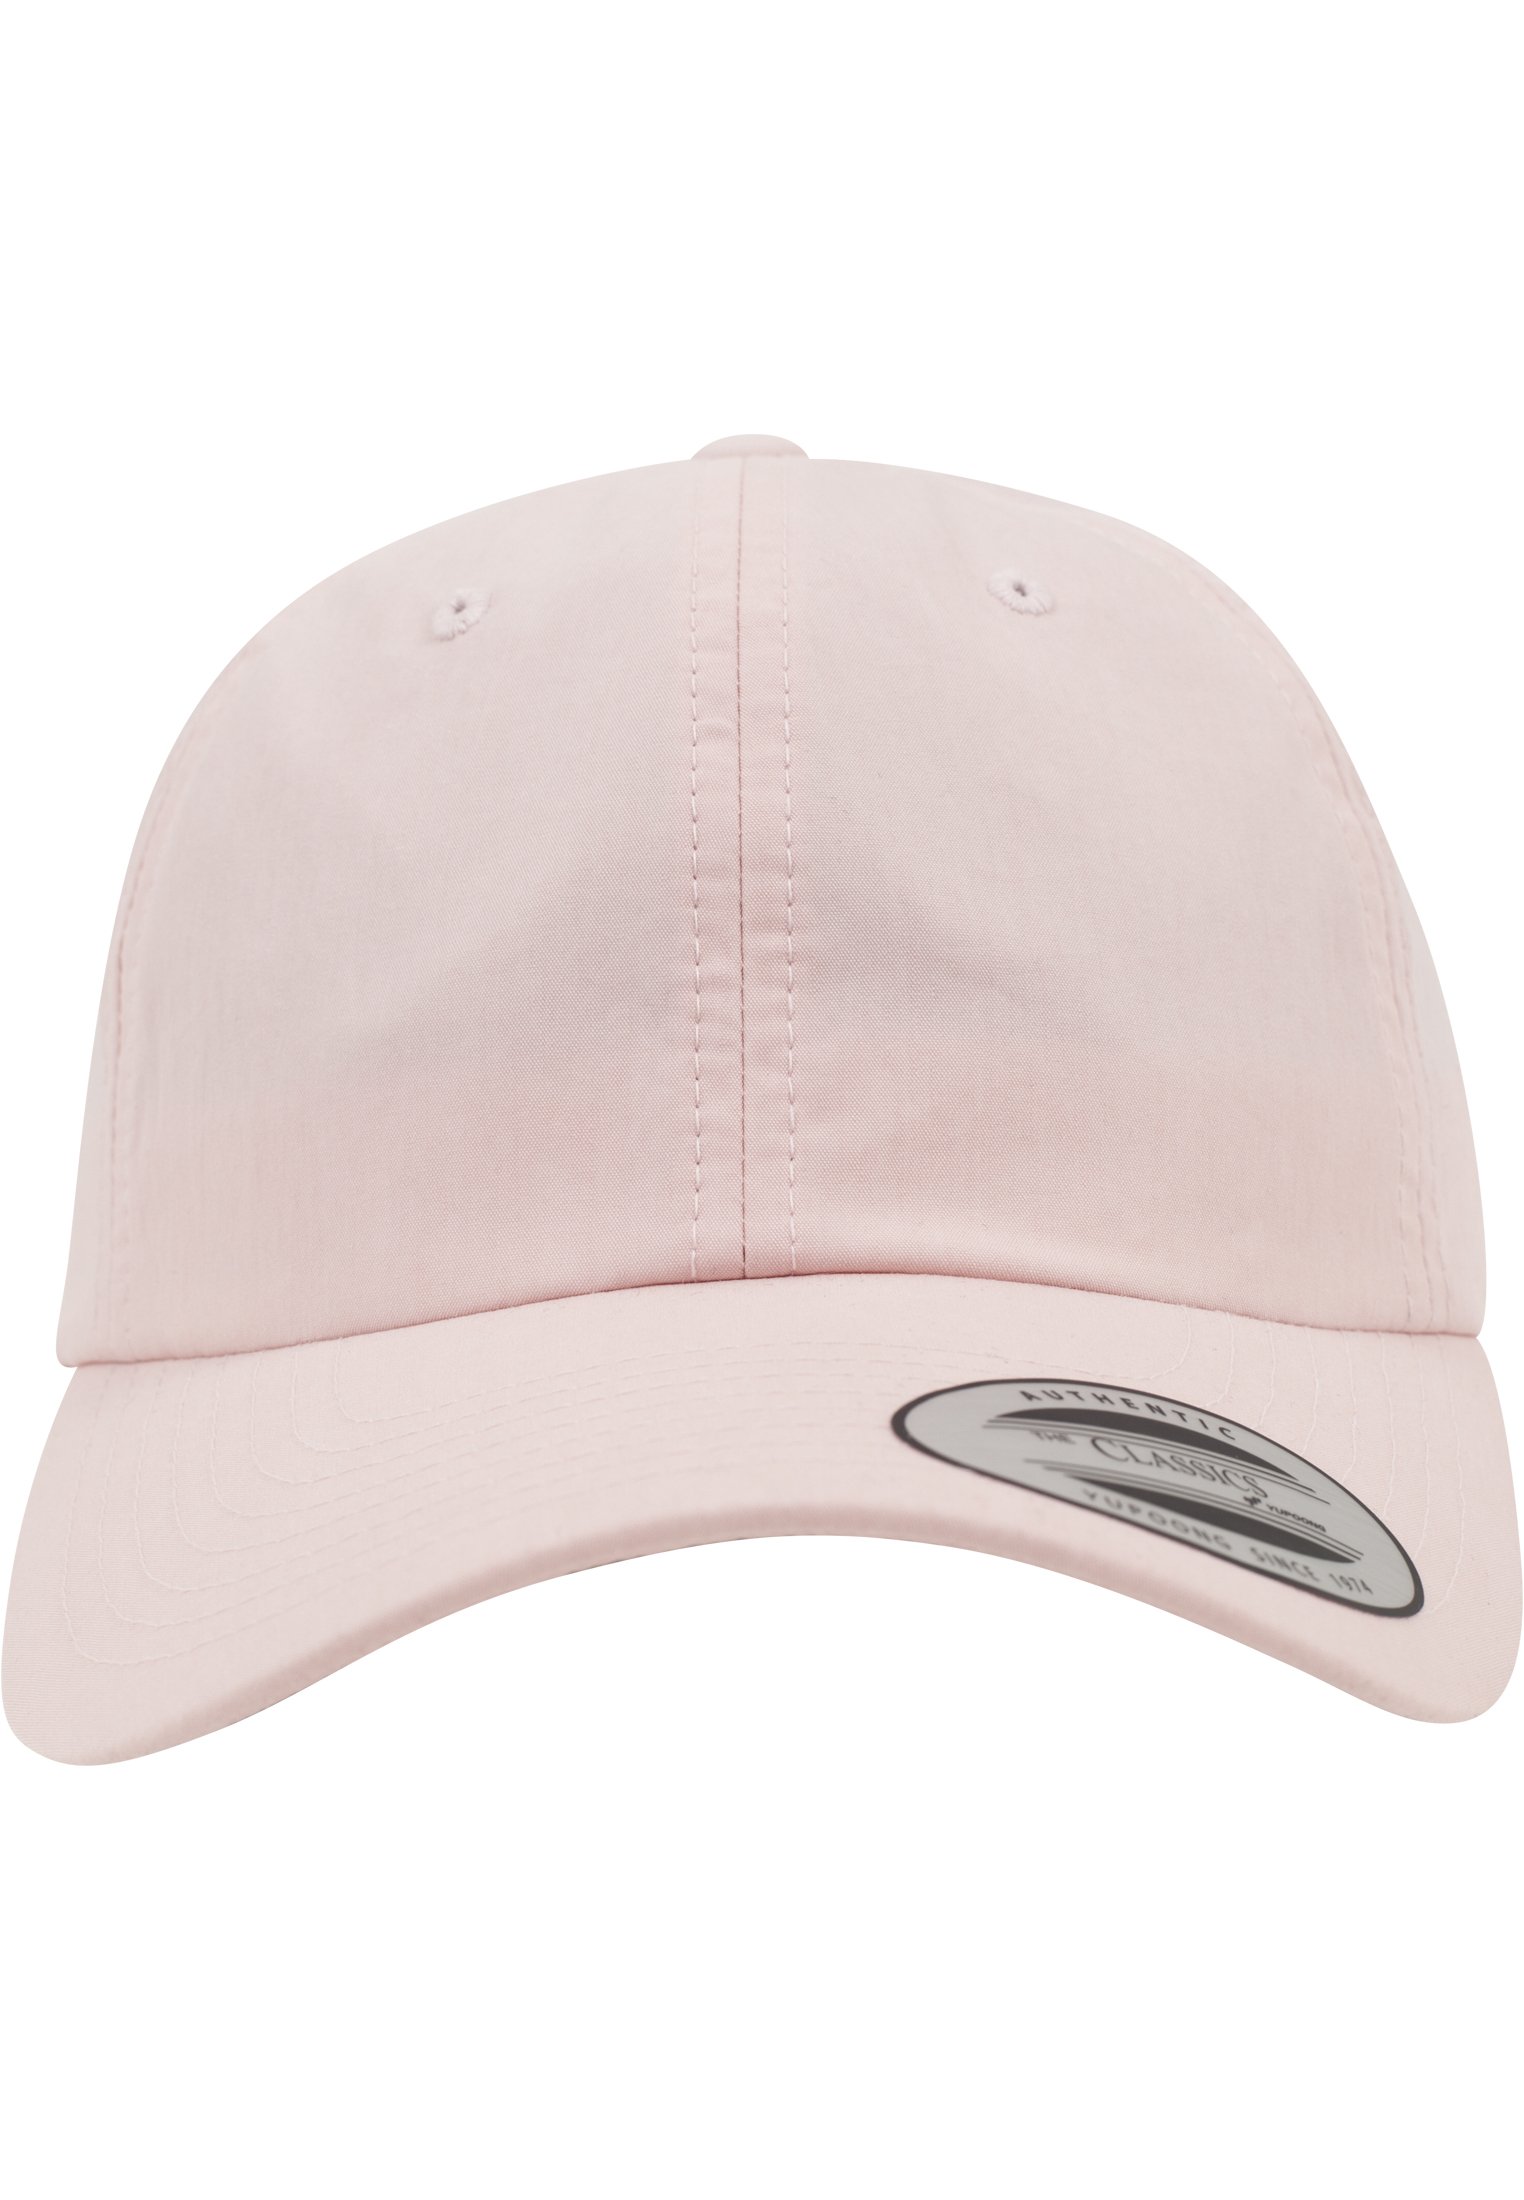 Low Washed Cap-6245W Profile